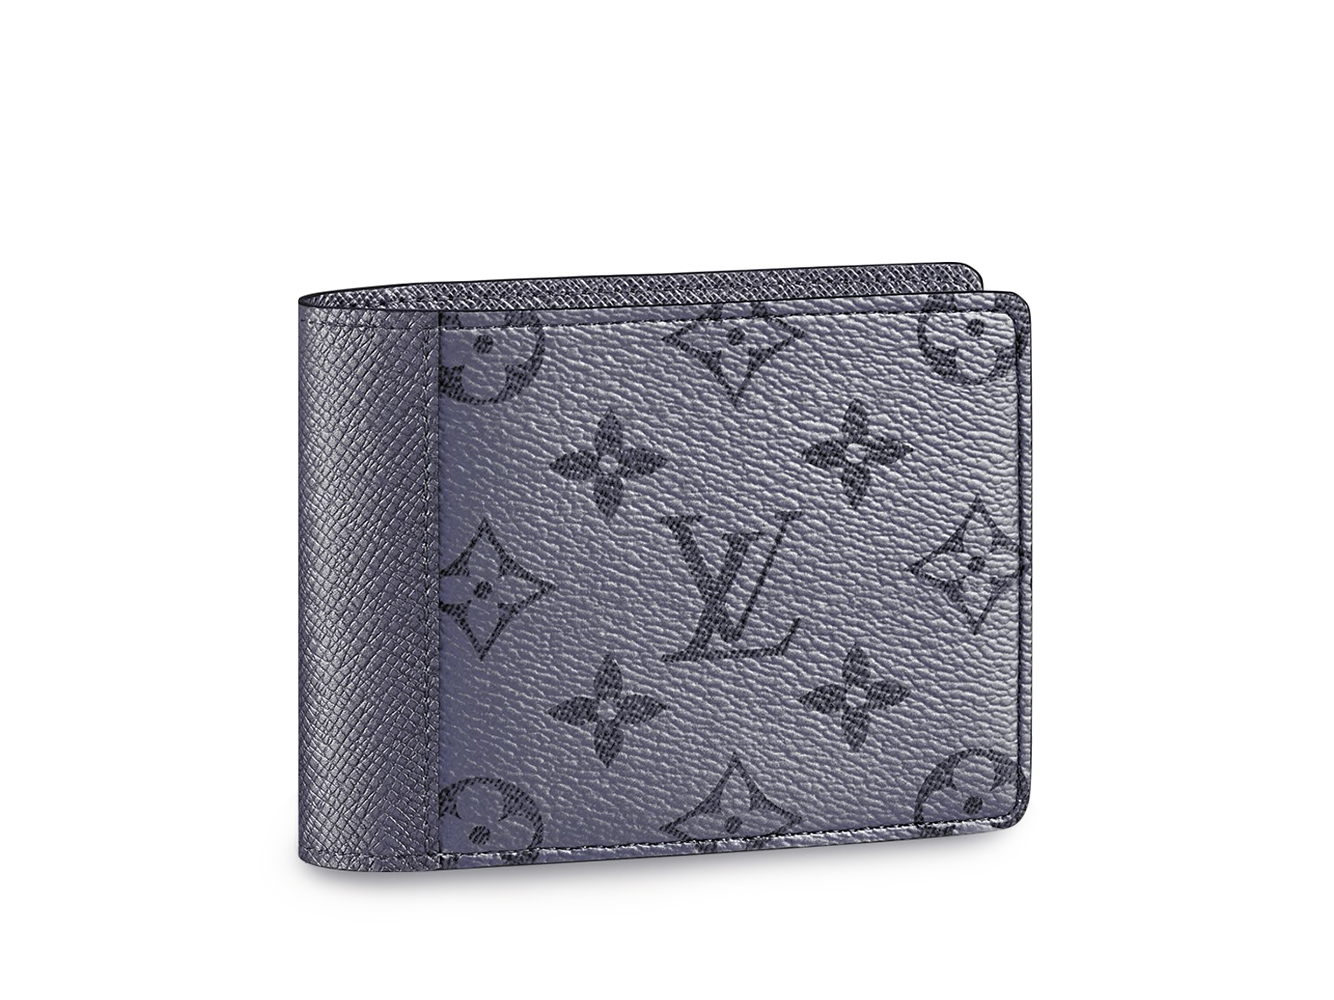 Best wallets for men 2021 Leather and suede styles from Louis Vuitton  Gucci Prada and more  The Independent